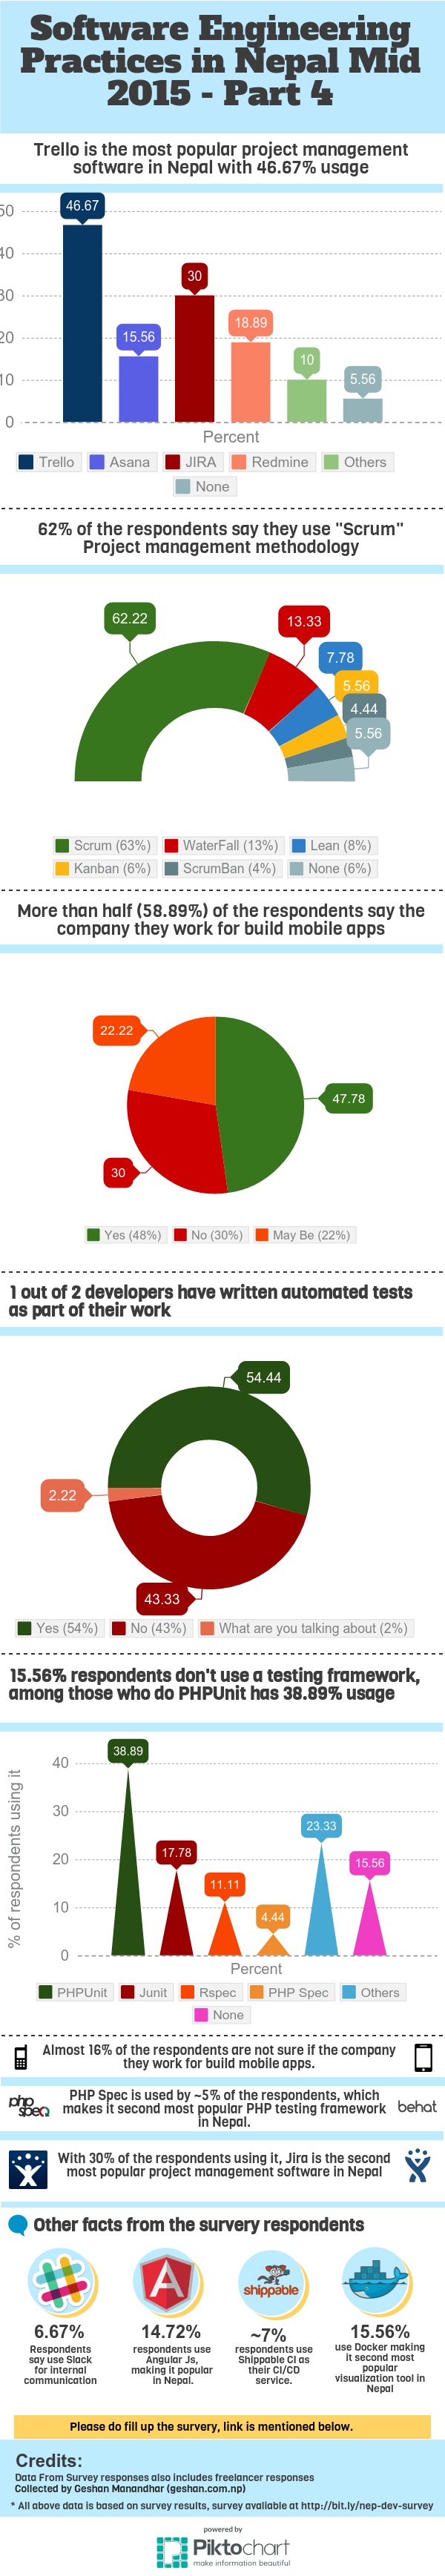 Software Engineering Practices in Nepal Infographics Part 4